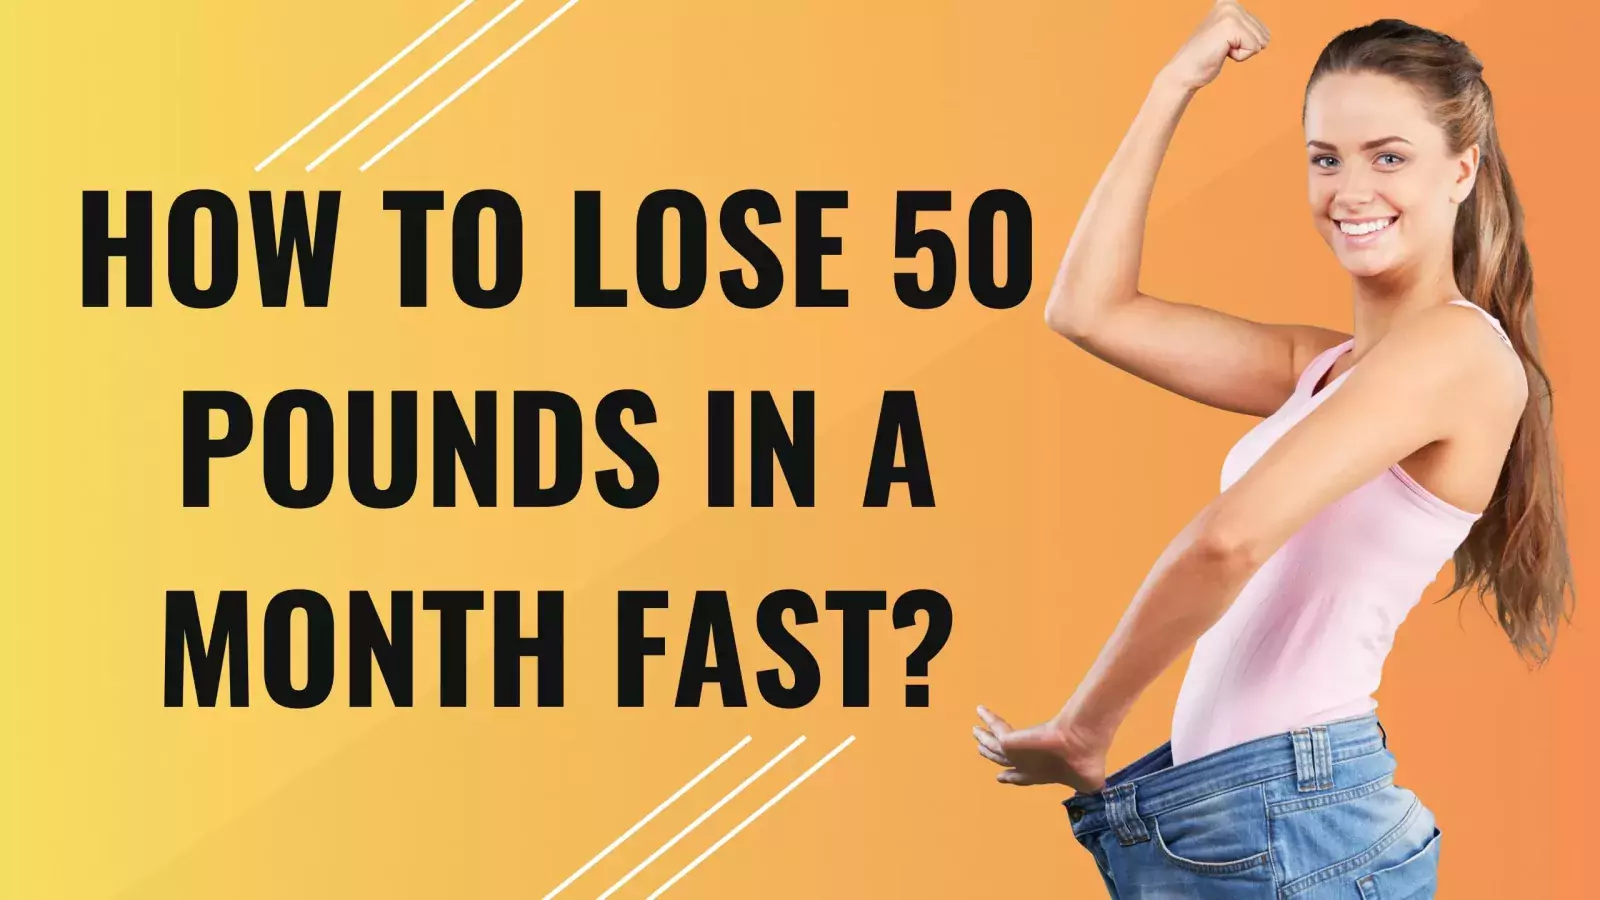 How to Lose 50 Pounds in a Month Fast